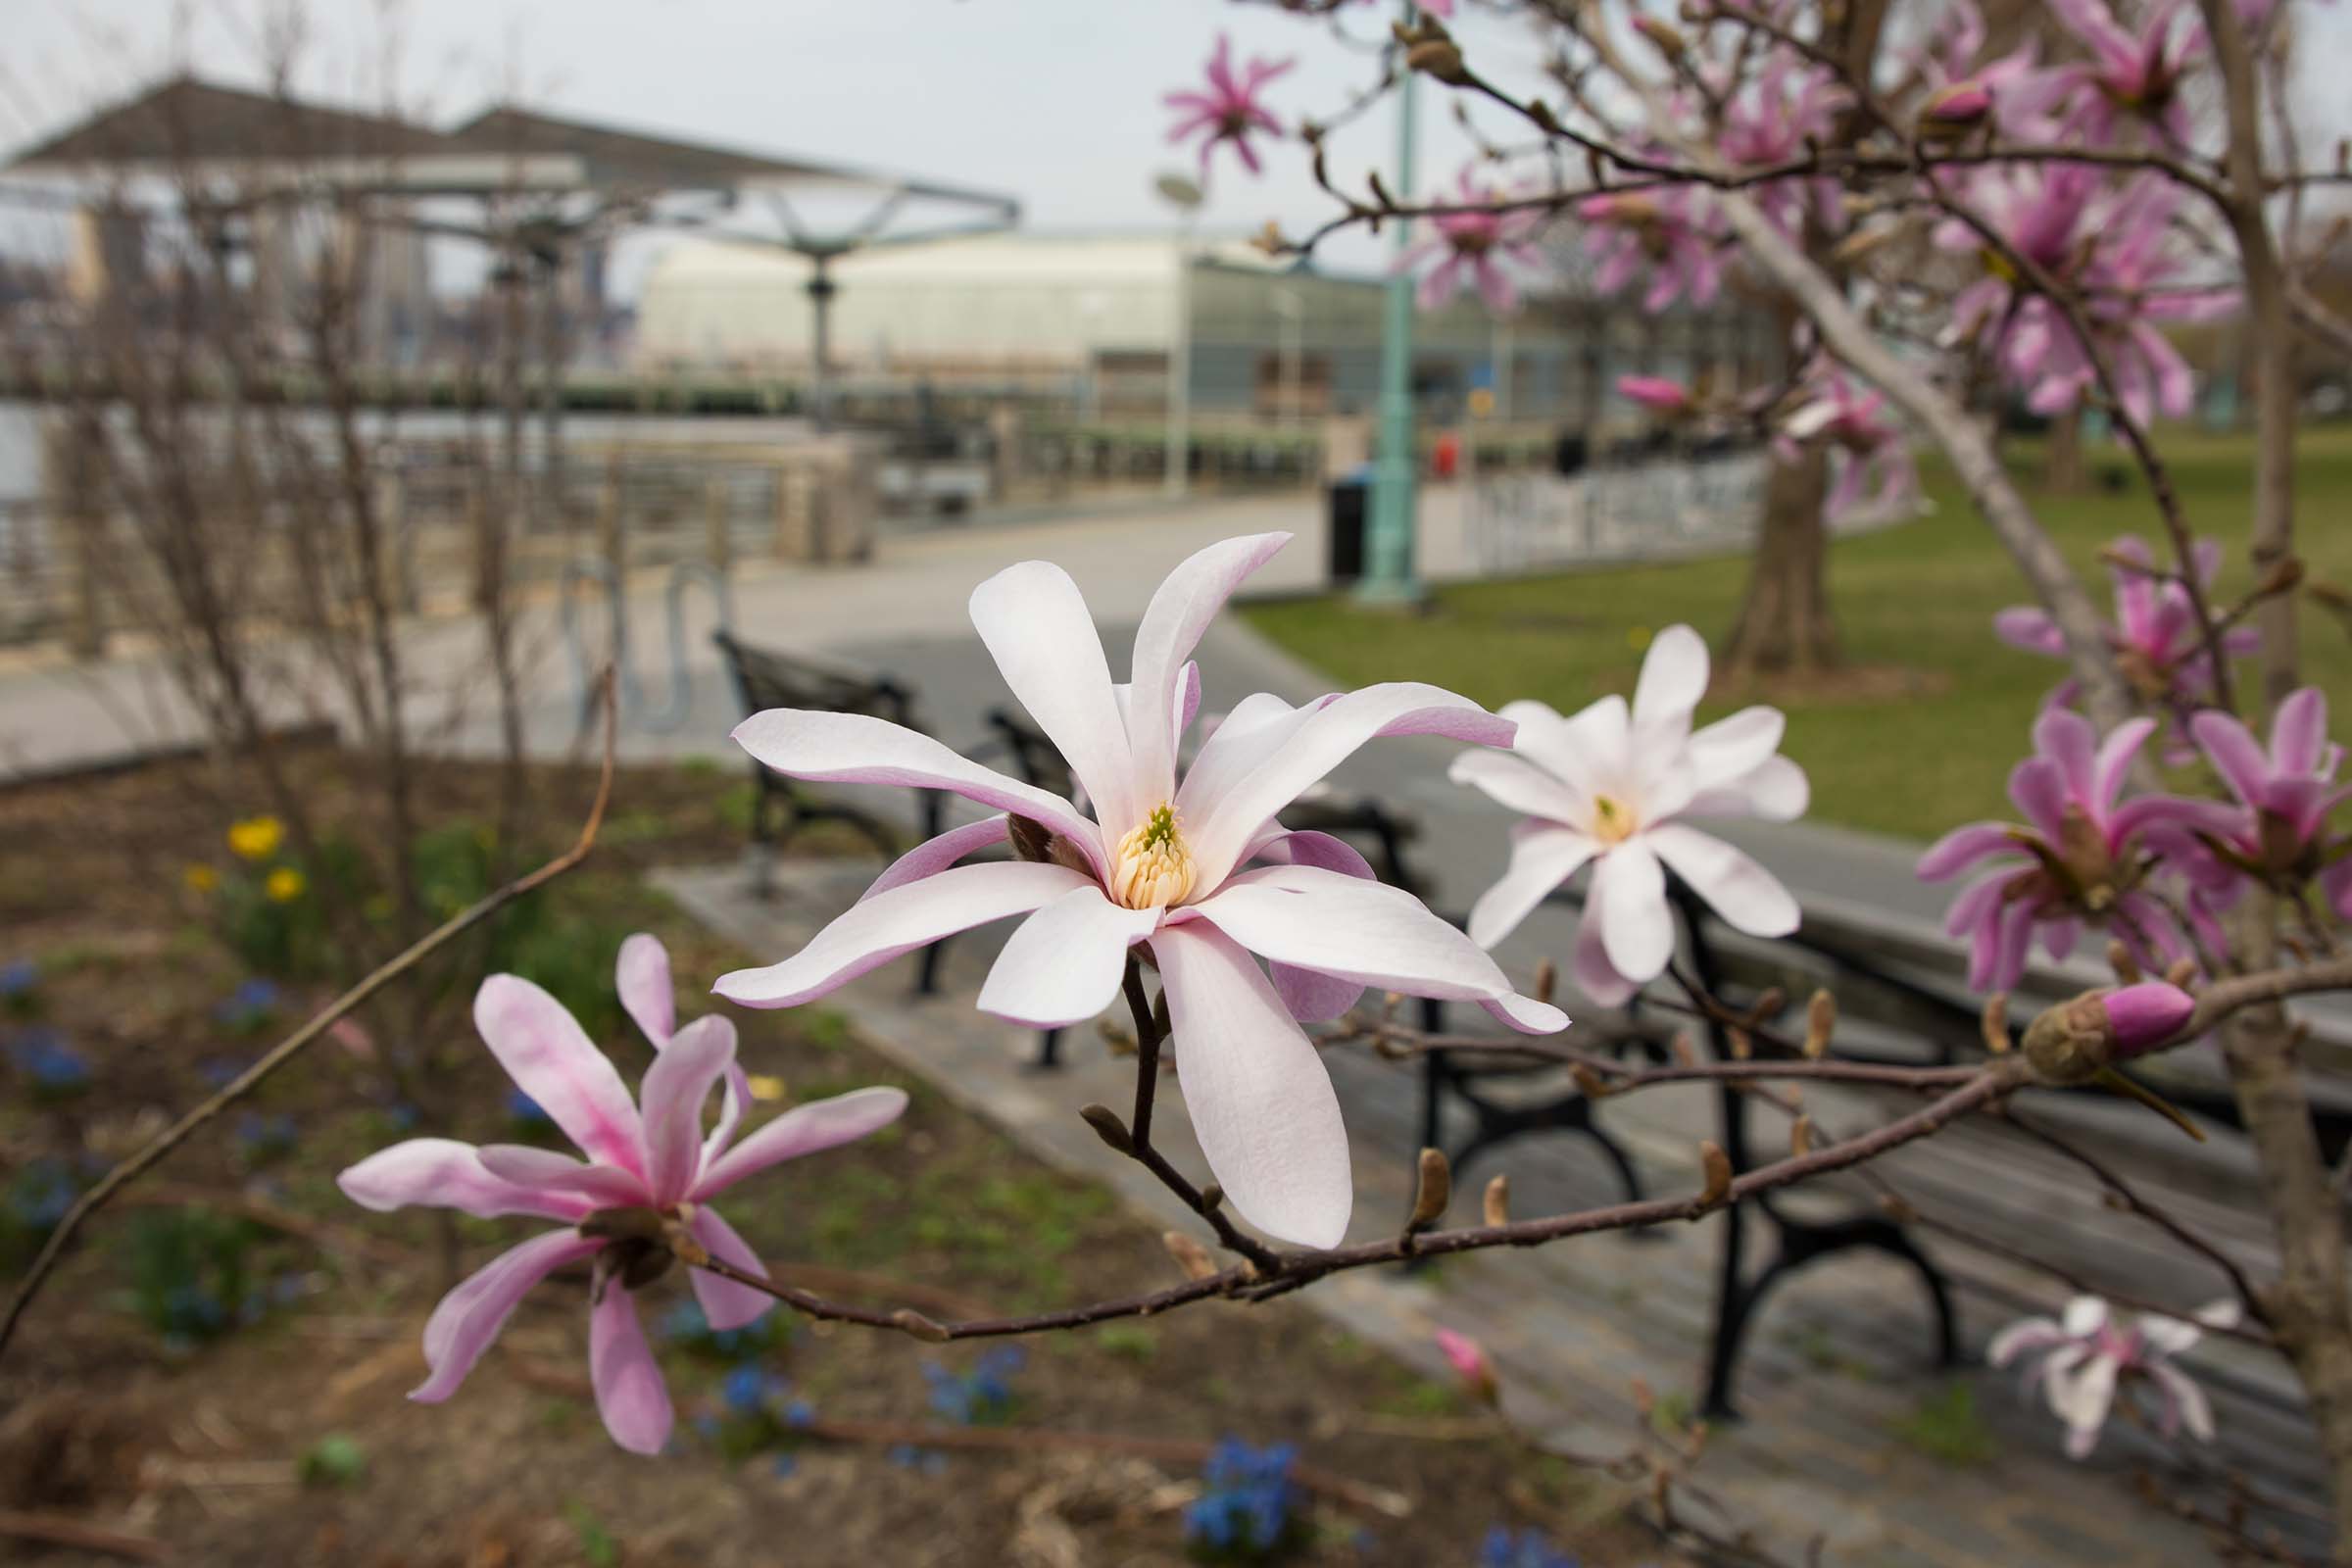 After the full bloom of the star magnolia it resembles a star-like shape with the petals stretched out